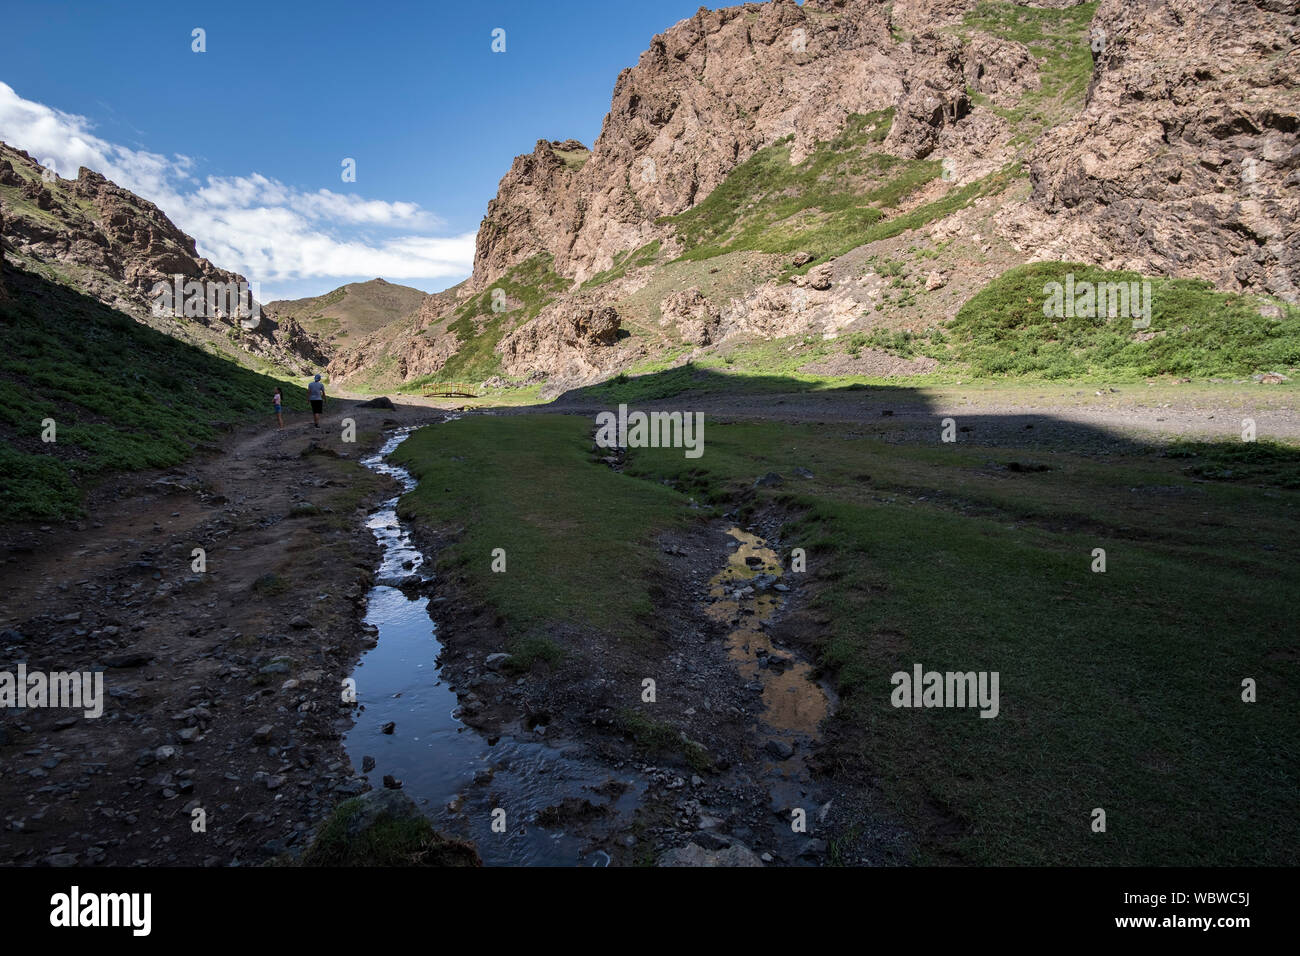 Yolyn Am is a deep and narrow gorge in the Gurvan Saikhan Mountains of southern Mongolia. The valley is named after the Lammergeier. Stock Photo